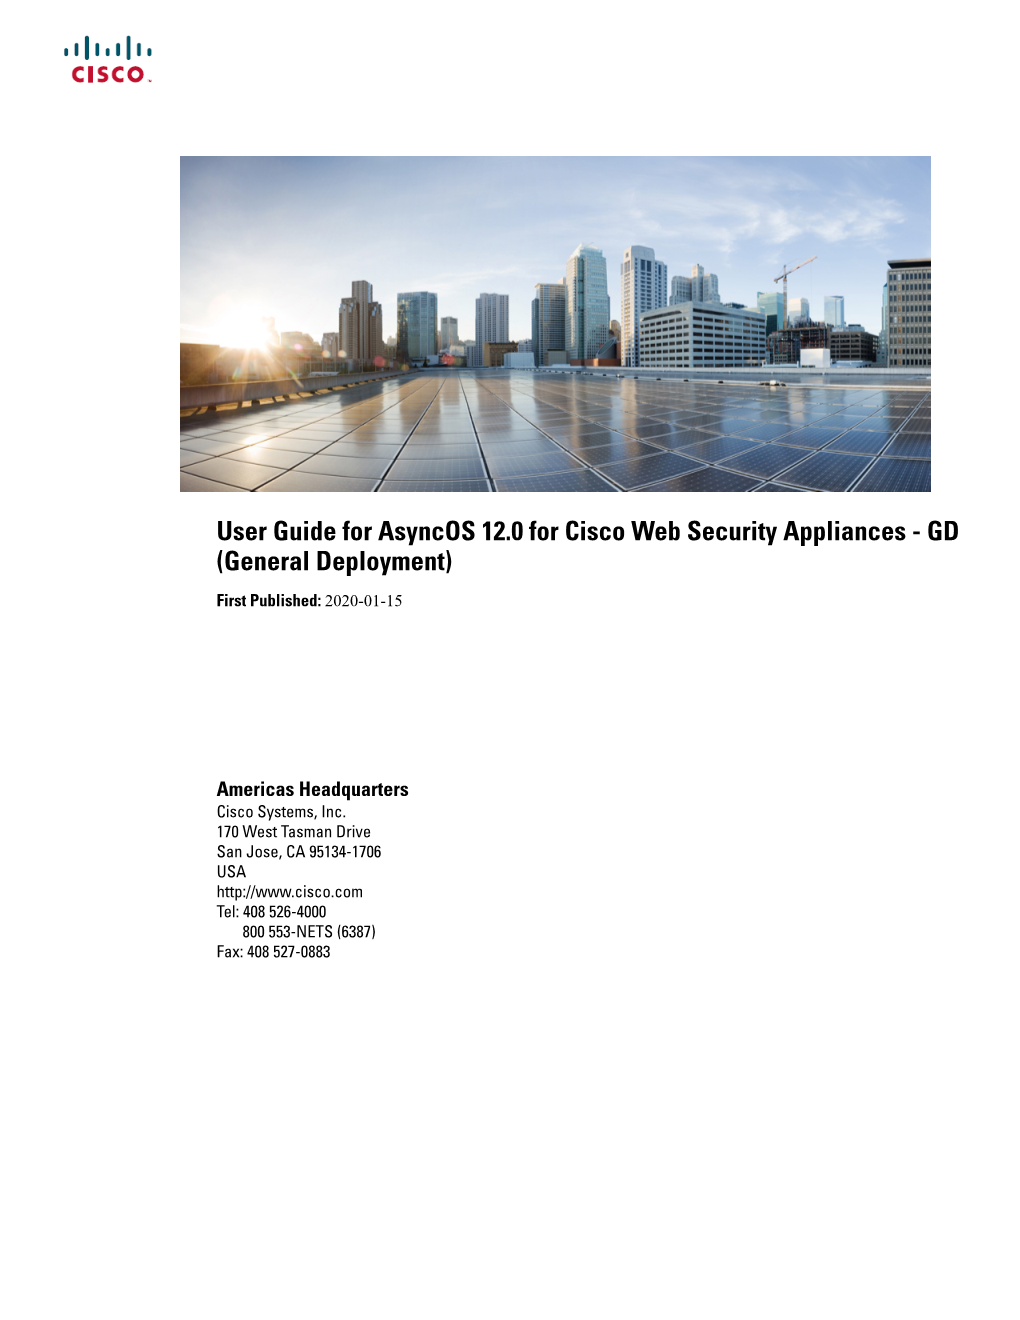 User Guide for Asyncos 12.0 for Cisco Web Security Appliances - GD (General Deployment)